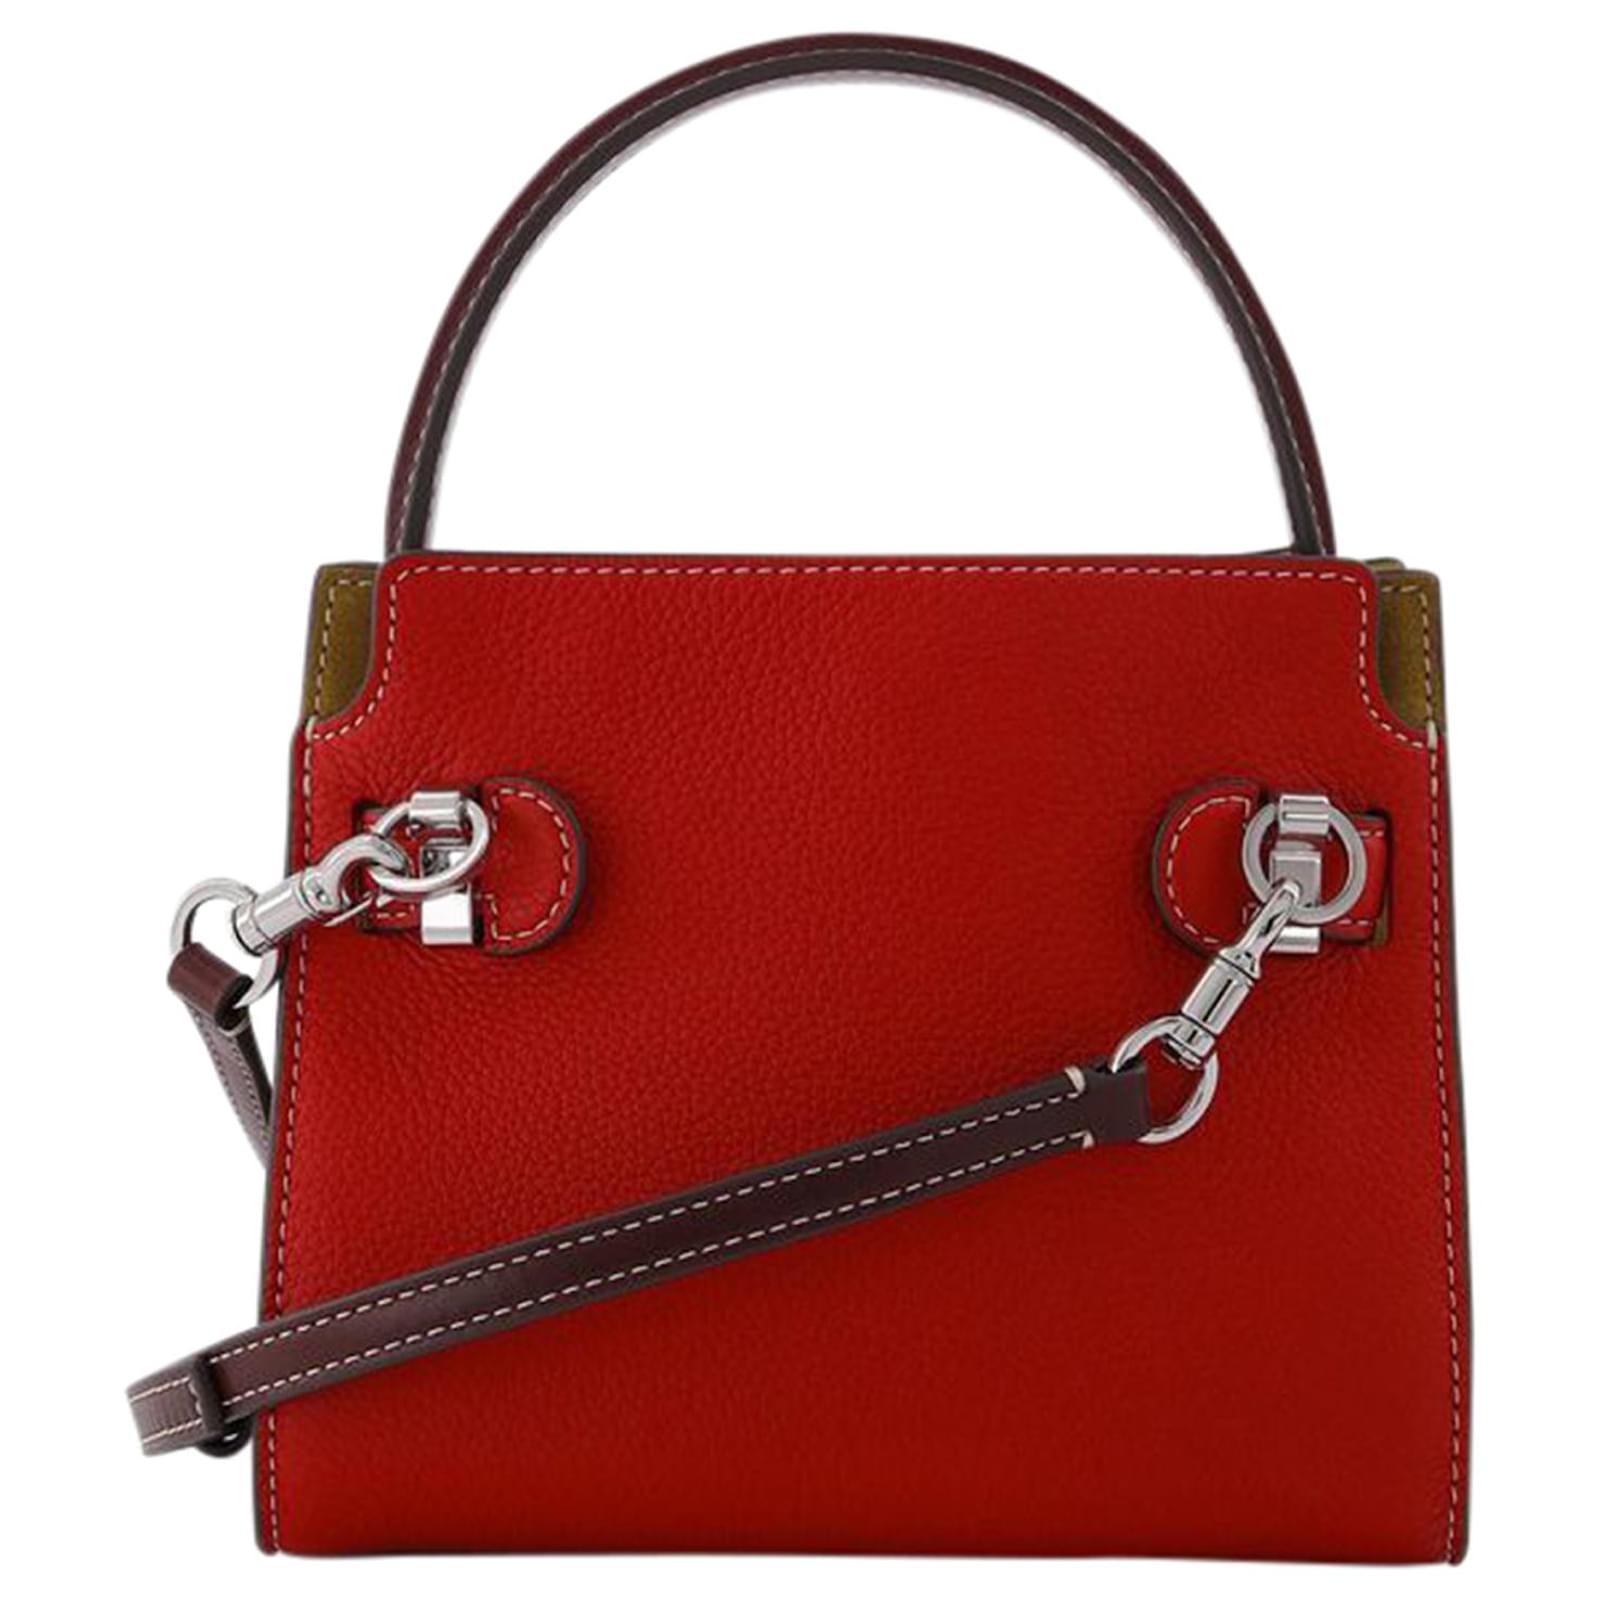 Tory Burch Lee Radziwill Pebbled Petite Double Bag Red Leather ref